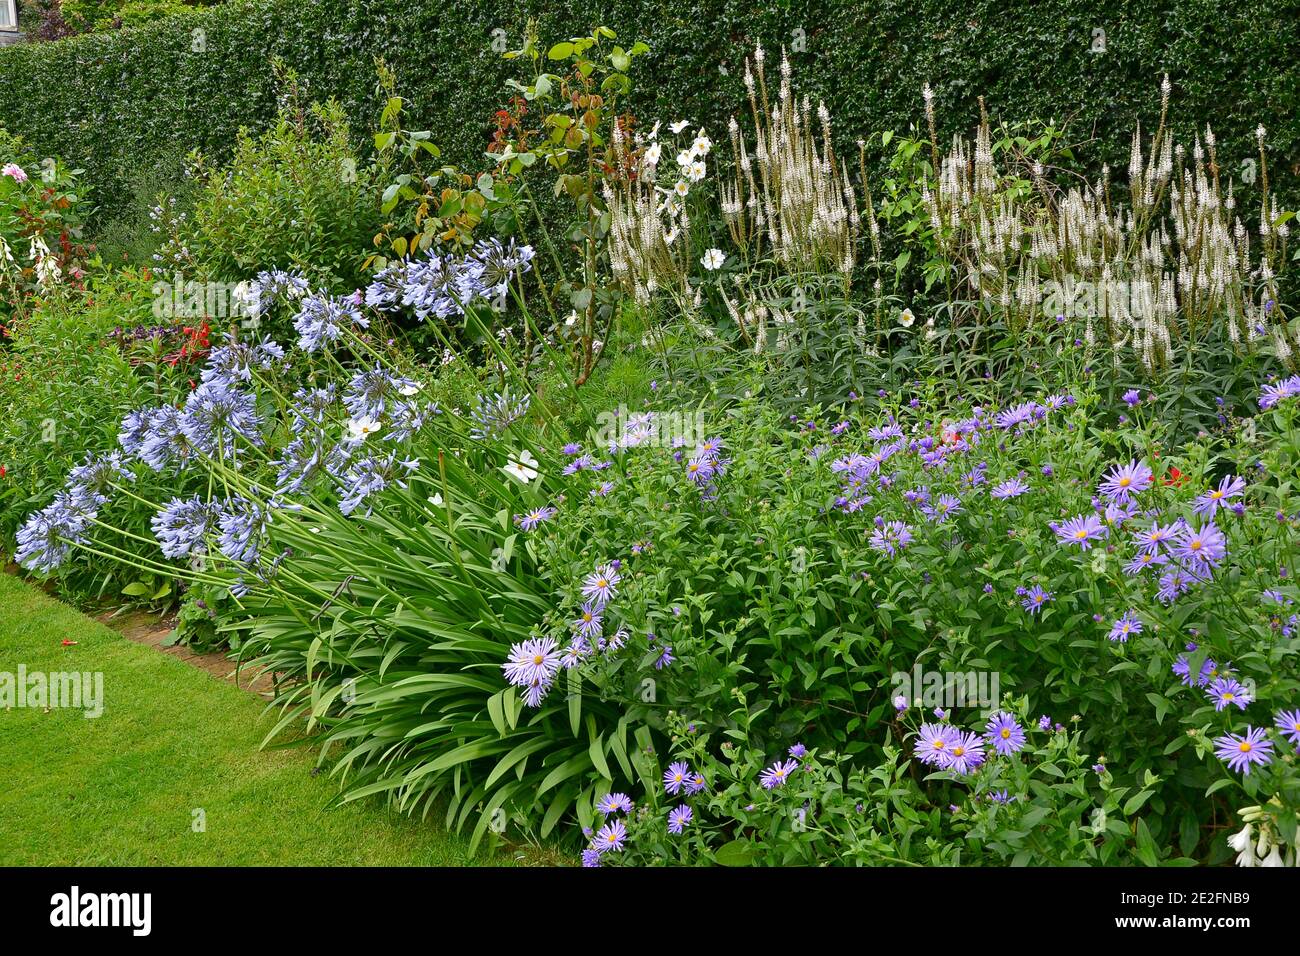 A colourful garden flower border with mixed planting including Agapanthus, Veronicastrum and Asters Stock Photo